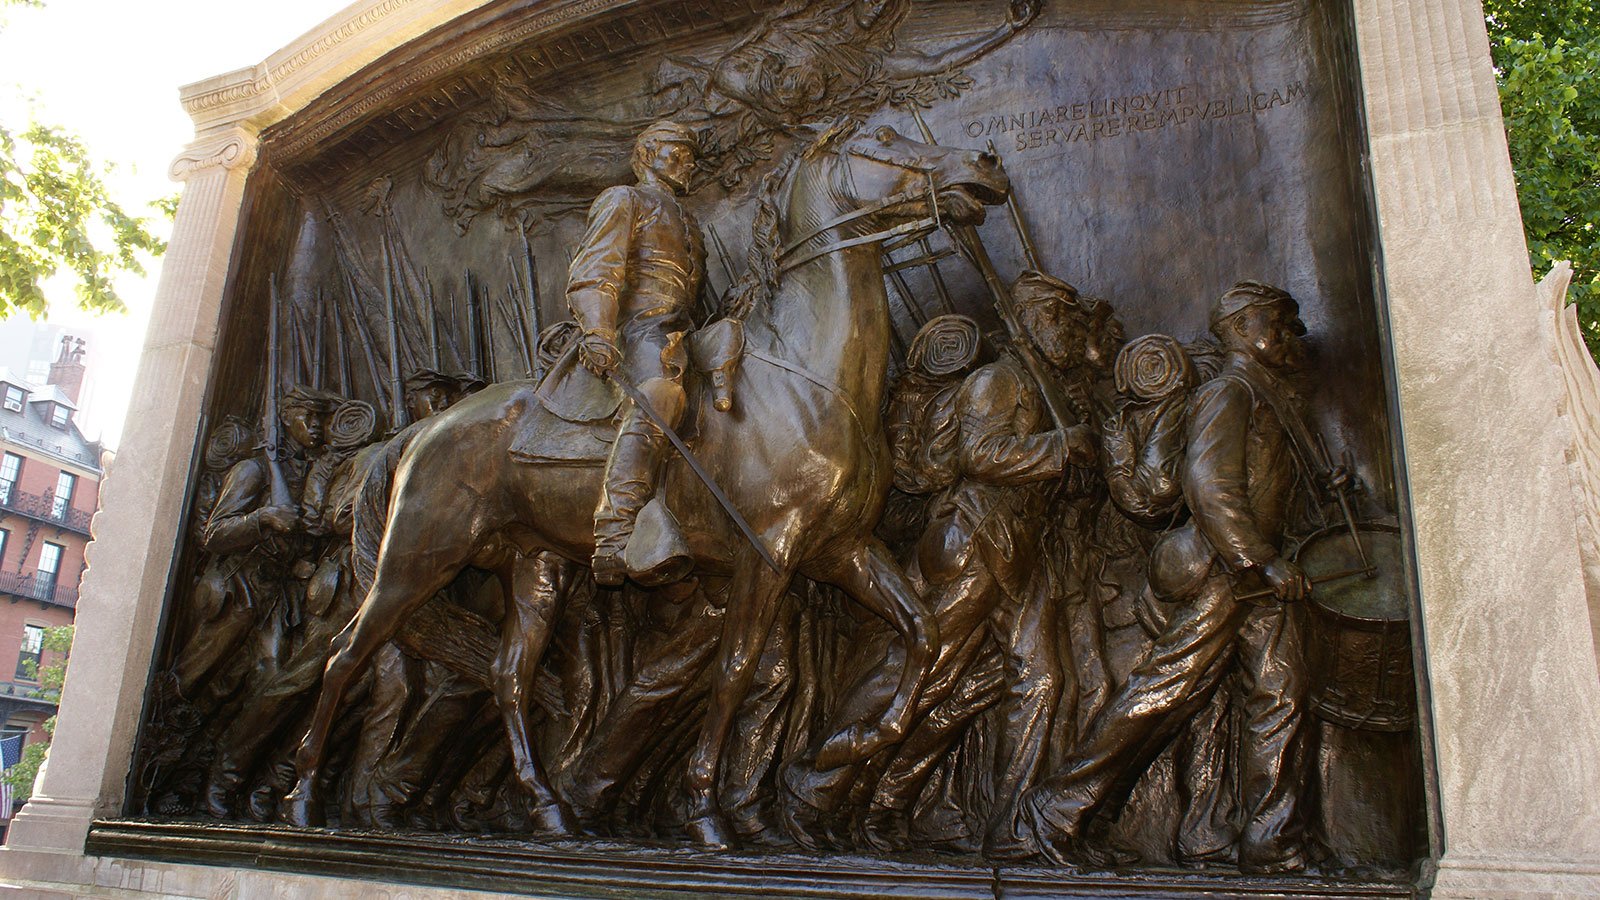 Memorial to Robert Gould Shaw and the Fifty-Fourth Massachusetts Regiment